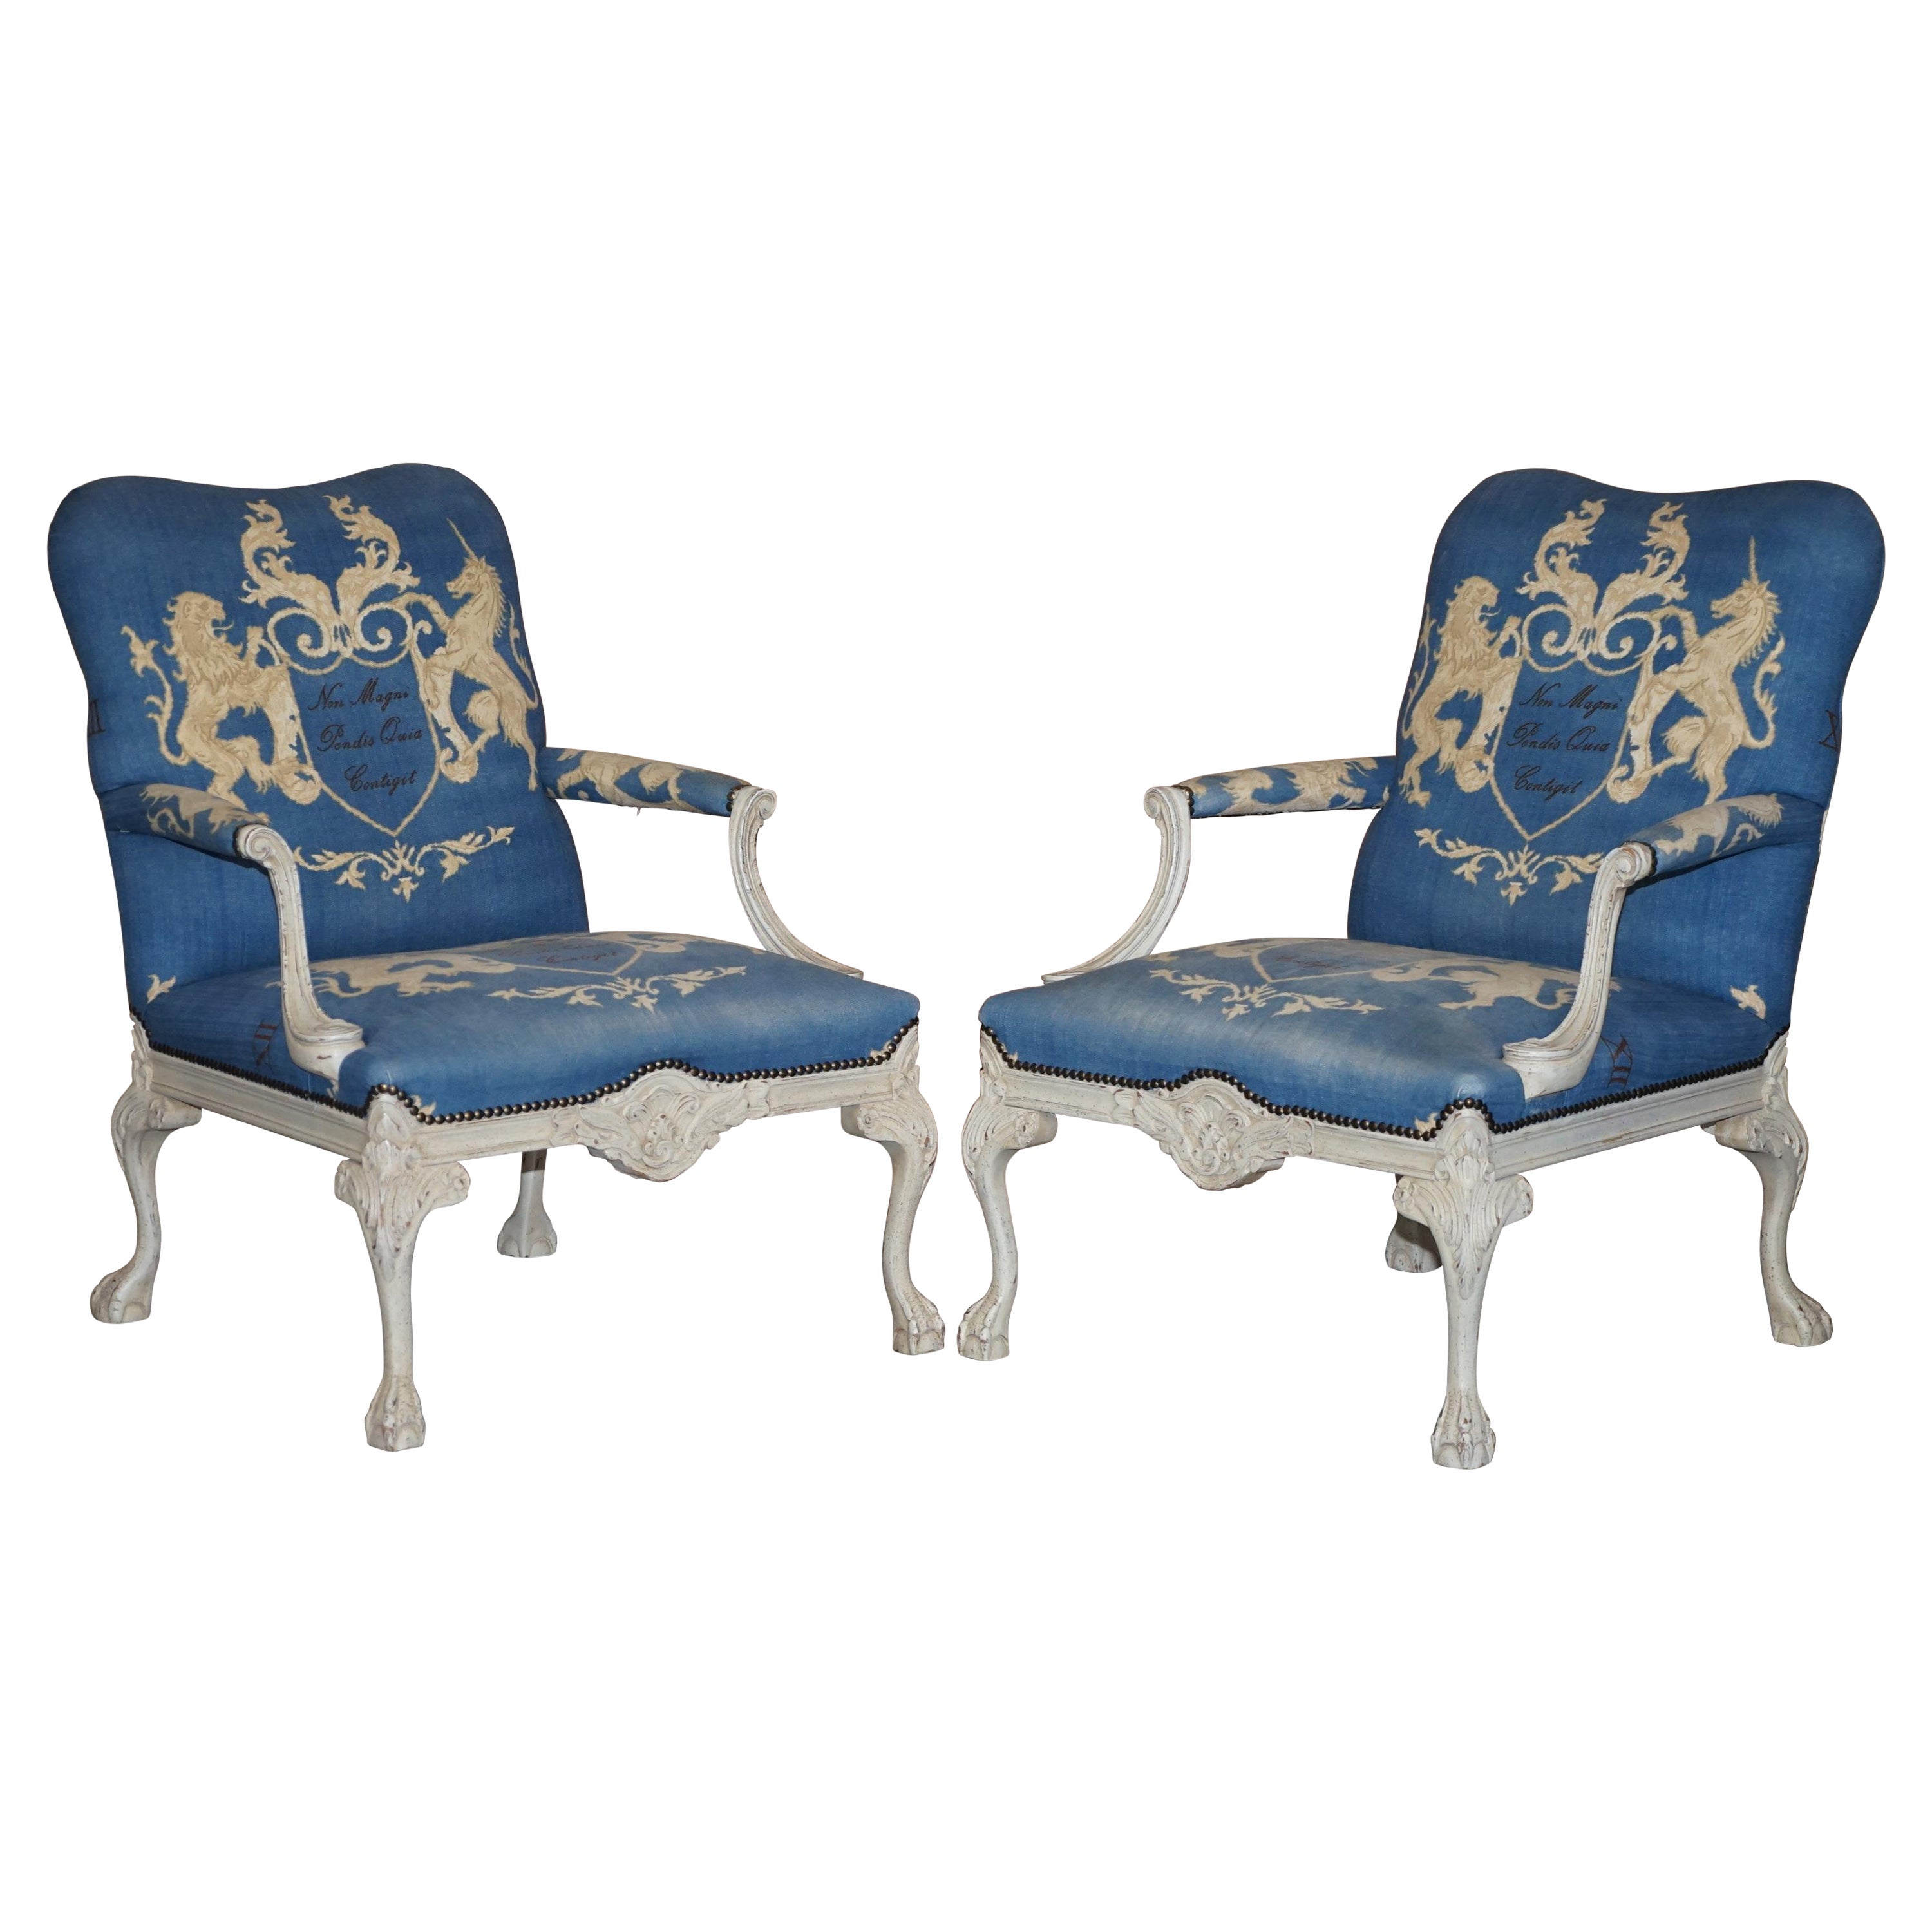 Vintage Pair of Italian Hand Painted Armchair Coat of Arms Armorial Upholstery